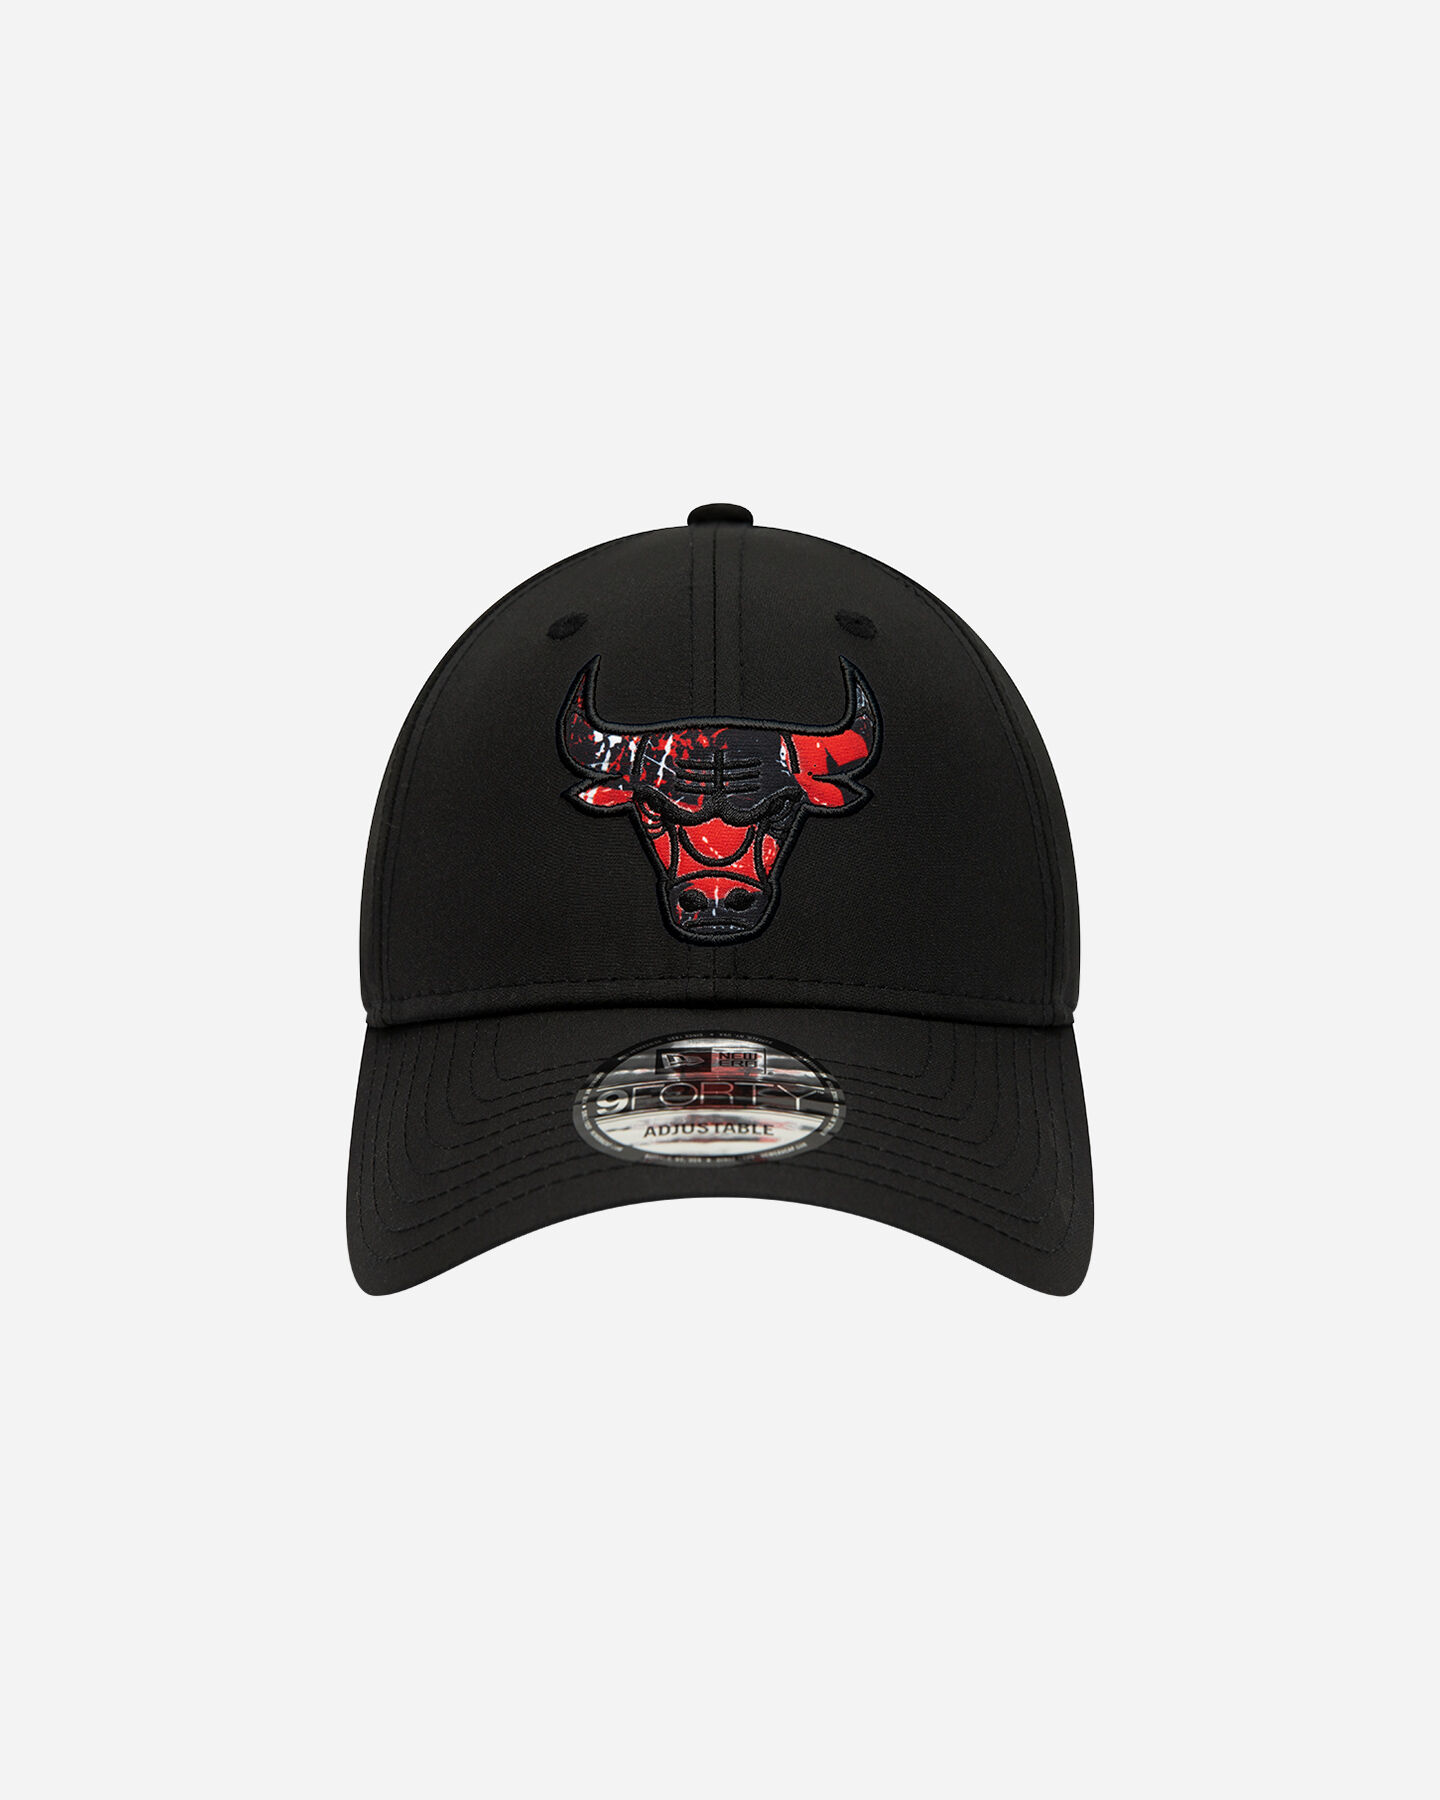  Cappellino NEW ERA 9FORTY PRINT INFILL CHICAGO BULLS  S5546175|001|OSFM scatto 1